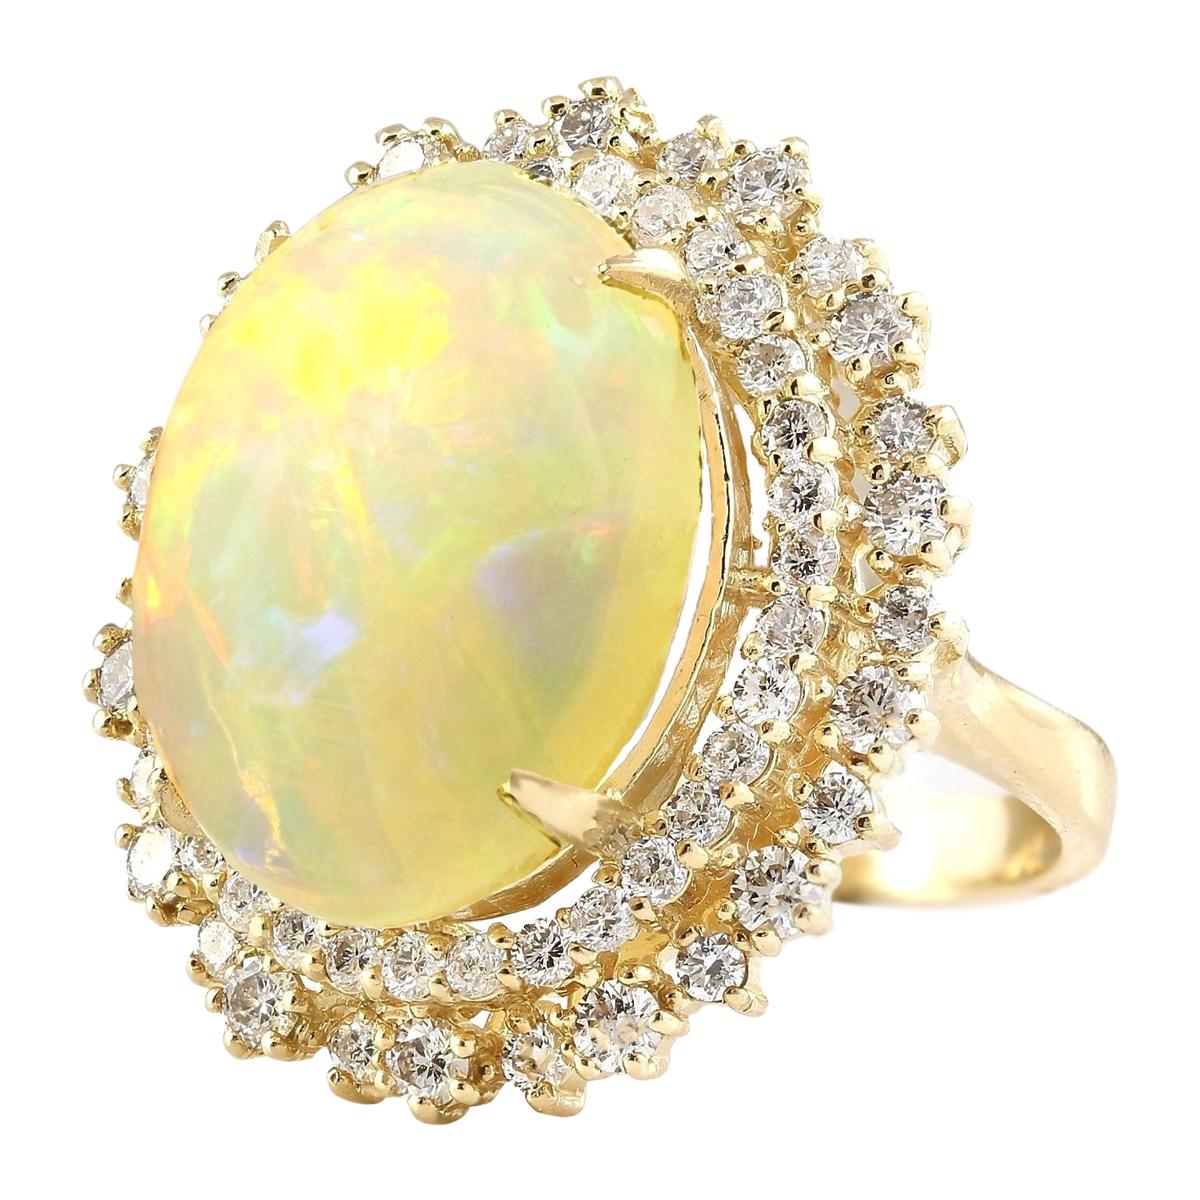 9.91 Carat Opal 14 Karat Yellow Gold Diamond Ring
Stamped: 14K Yellow Gold
Total Ring Weight: 9.2 Grams
Total  Opal Weight is 7.91 Carat (Measures: 18.00x13.00 mm)
Color: Multicolor
Total  Diamond Weight is 2.00 Carat
Color: F-G, Clarity: